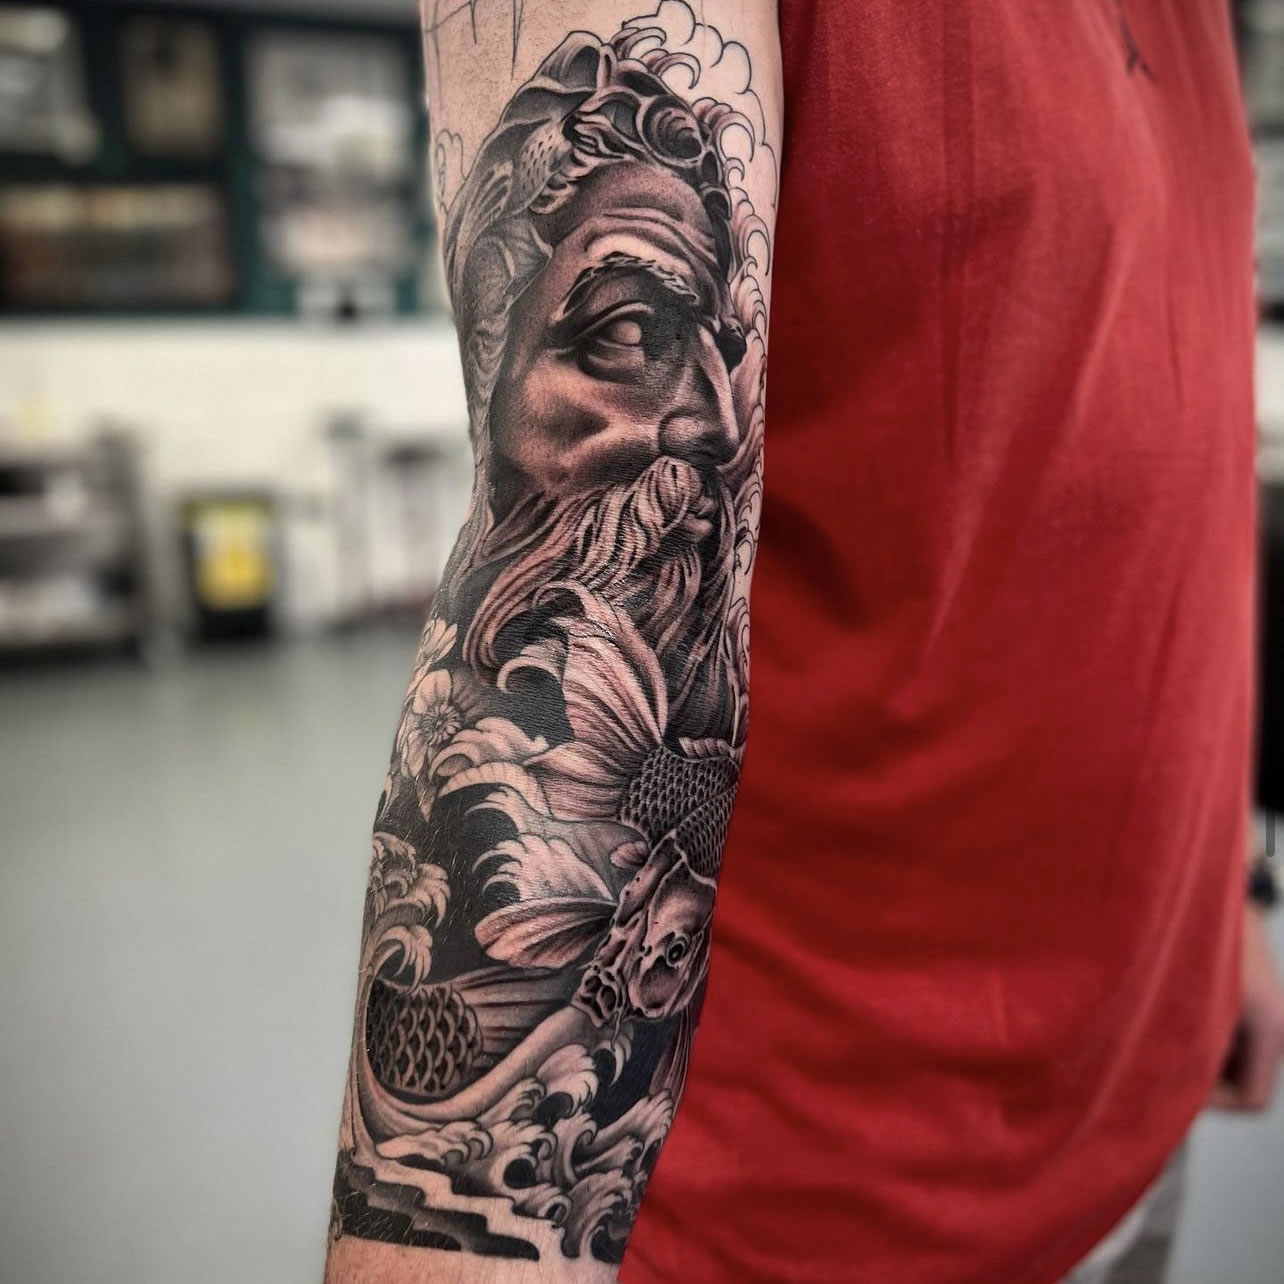 Tattoo uploaded by Cult Classic Tattoo • The Last of Us inspired tattoo by  Neal Bridson • Tattoodo